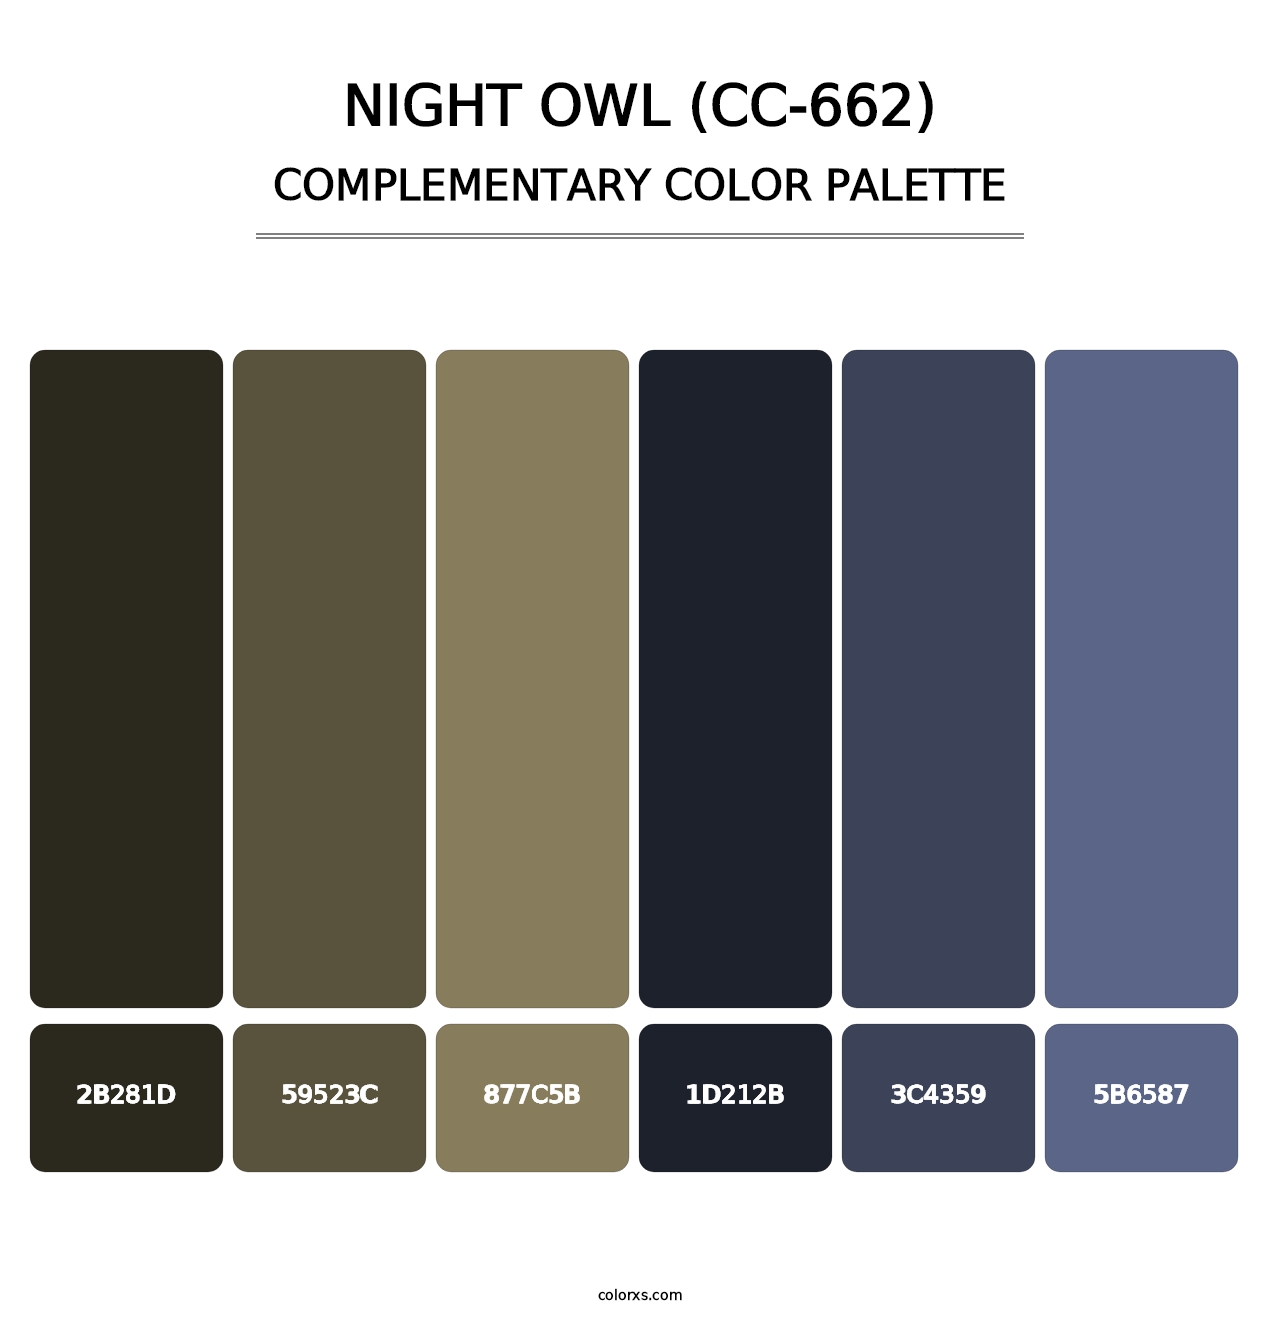 Night Owl (CC-662) - Complementary Color Palette